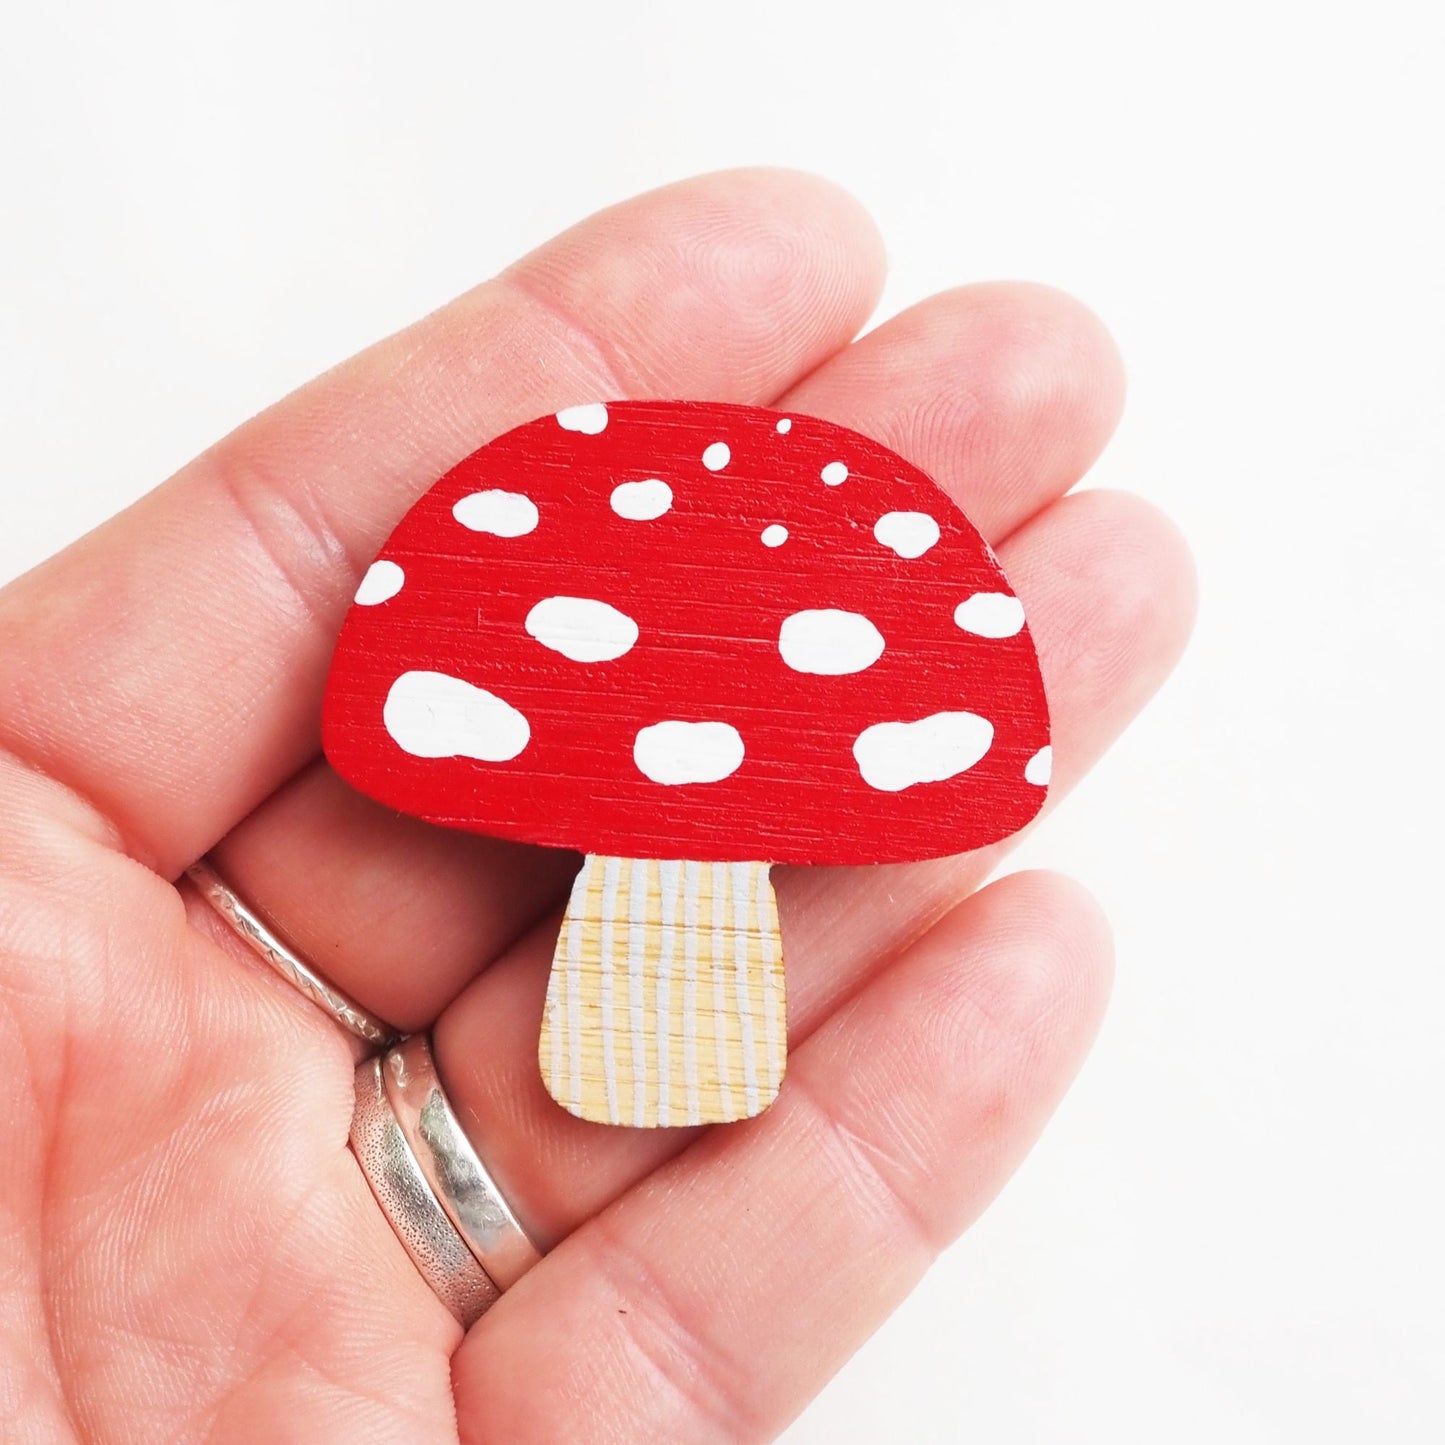 A toadstool brooch resting on four fingers. White backdrop.